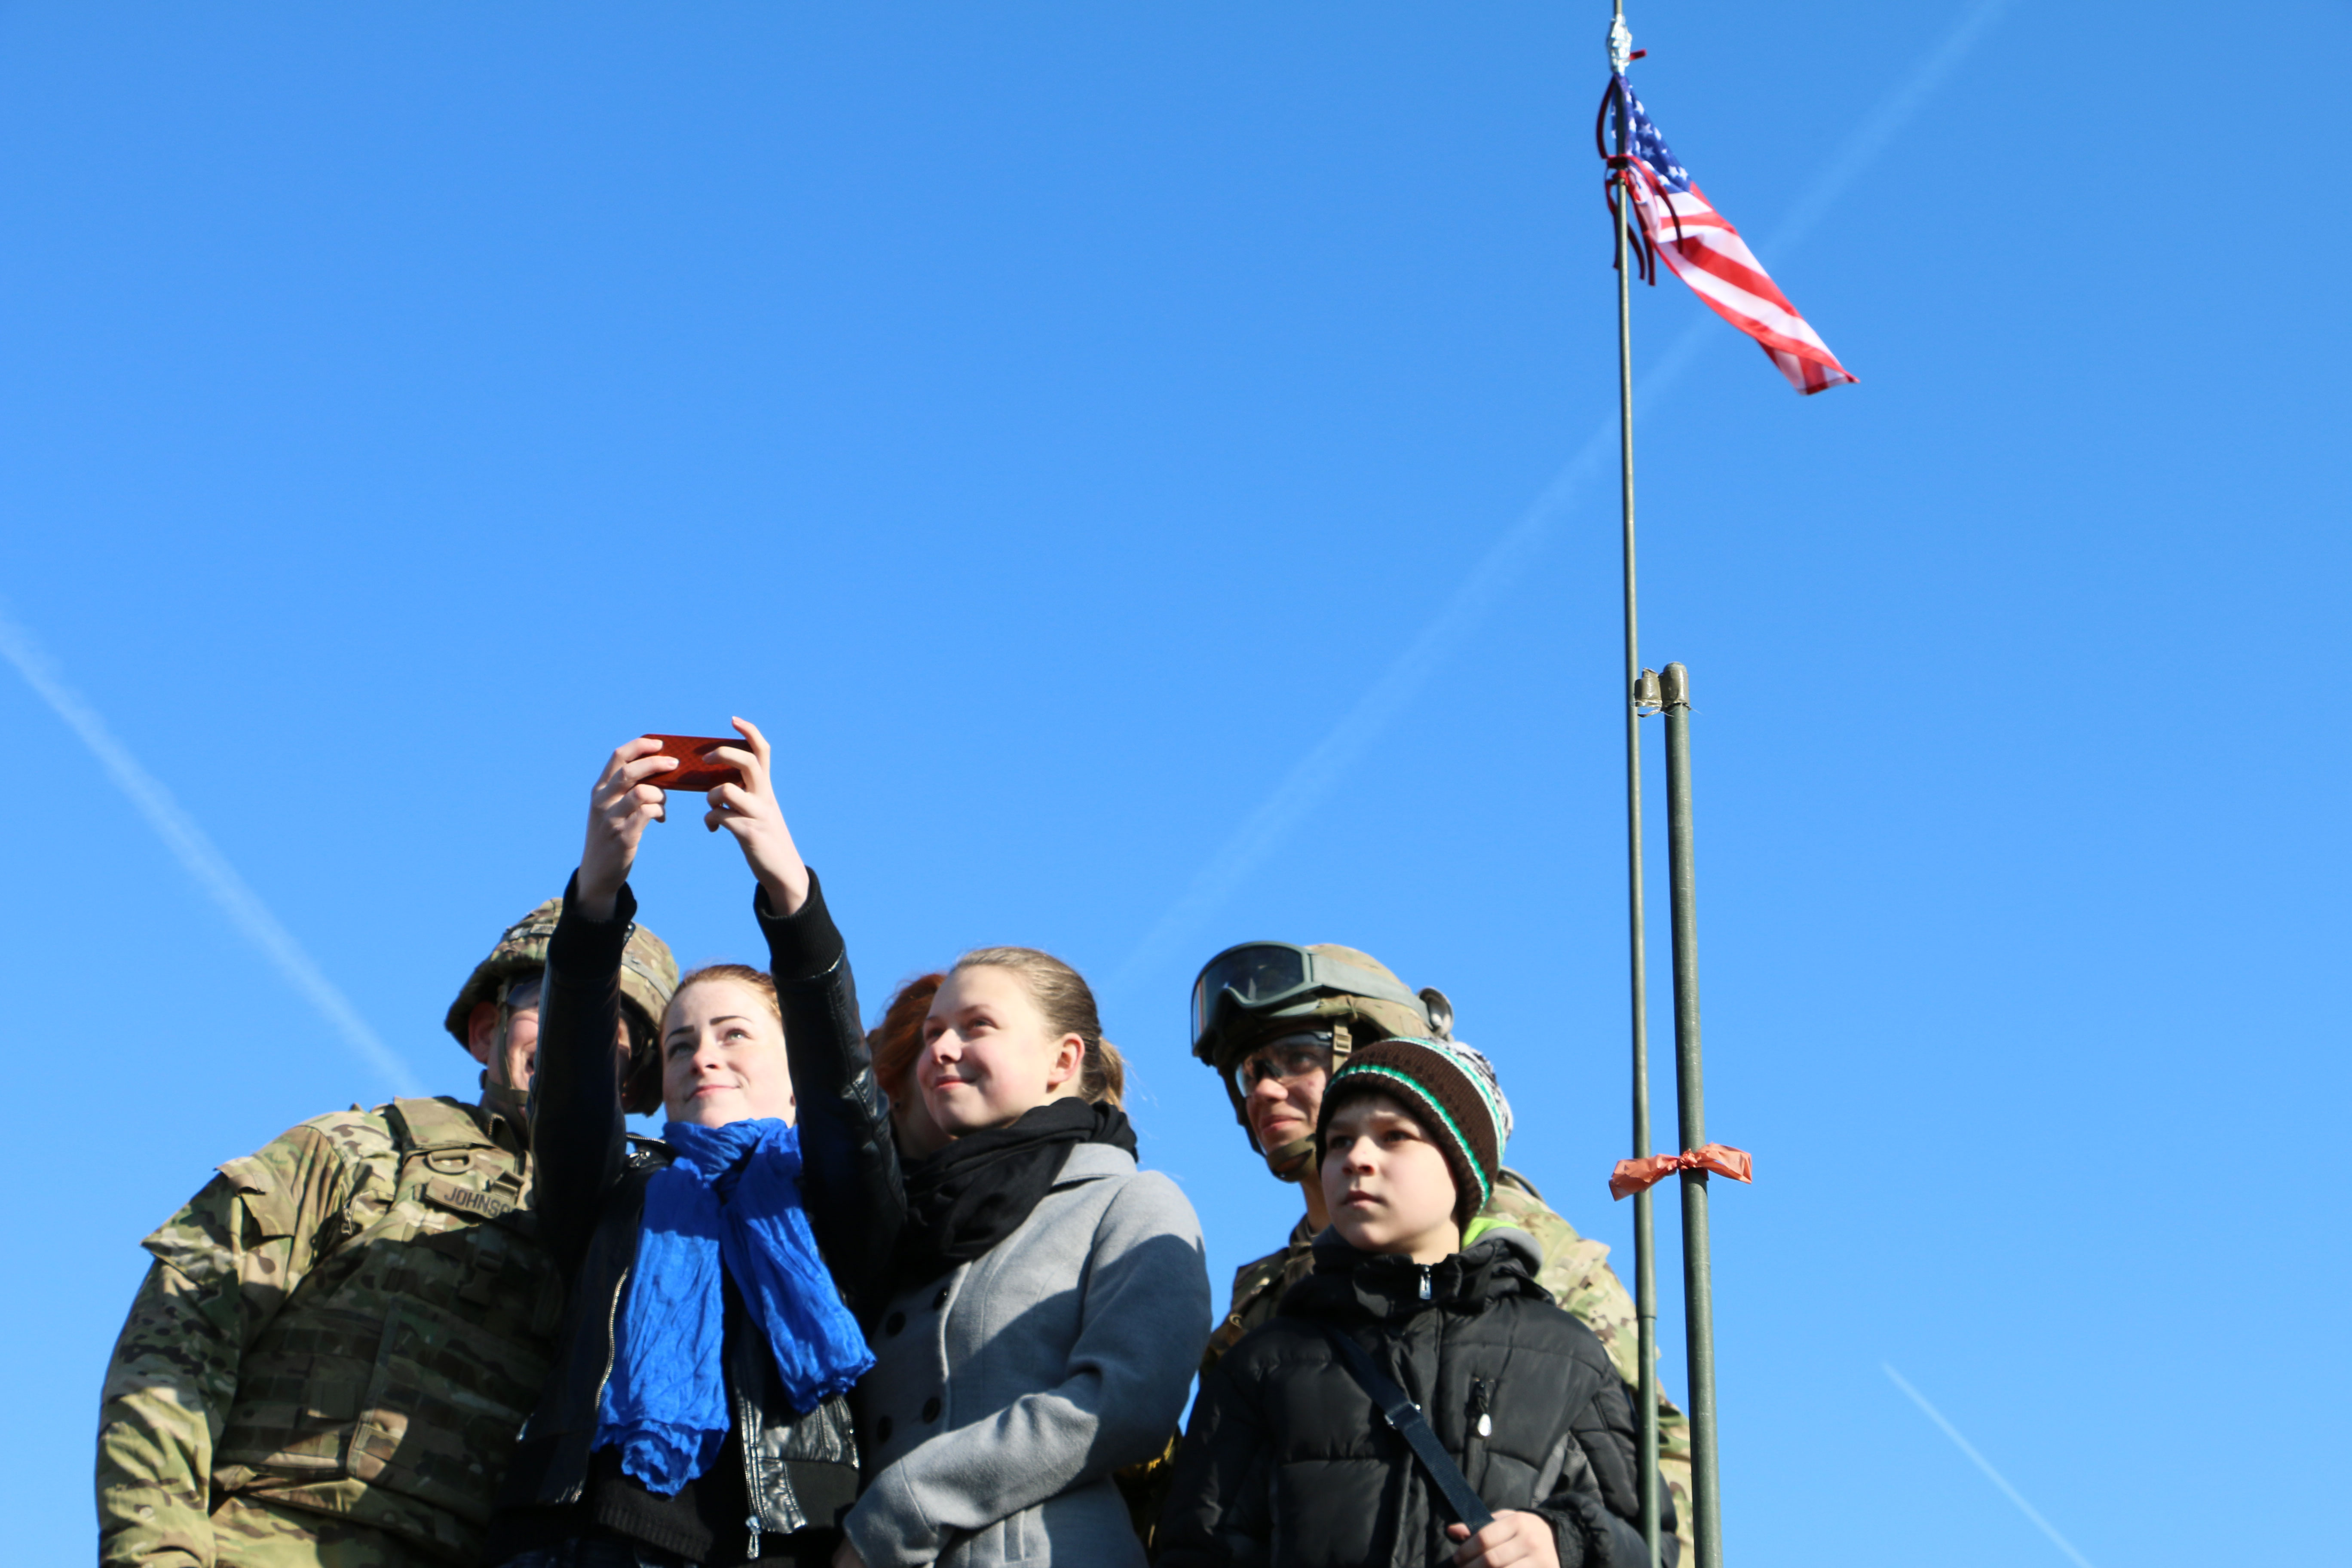 Lithuanians greet U.S. Army soldiers.